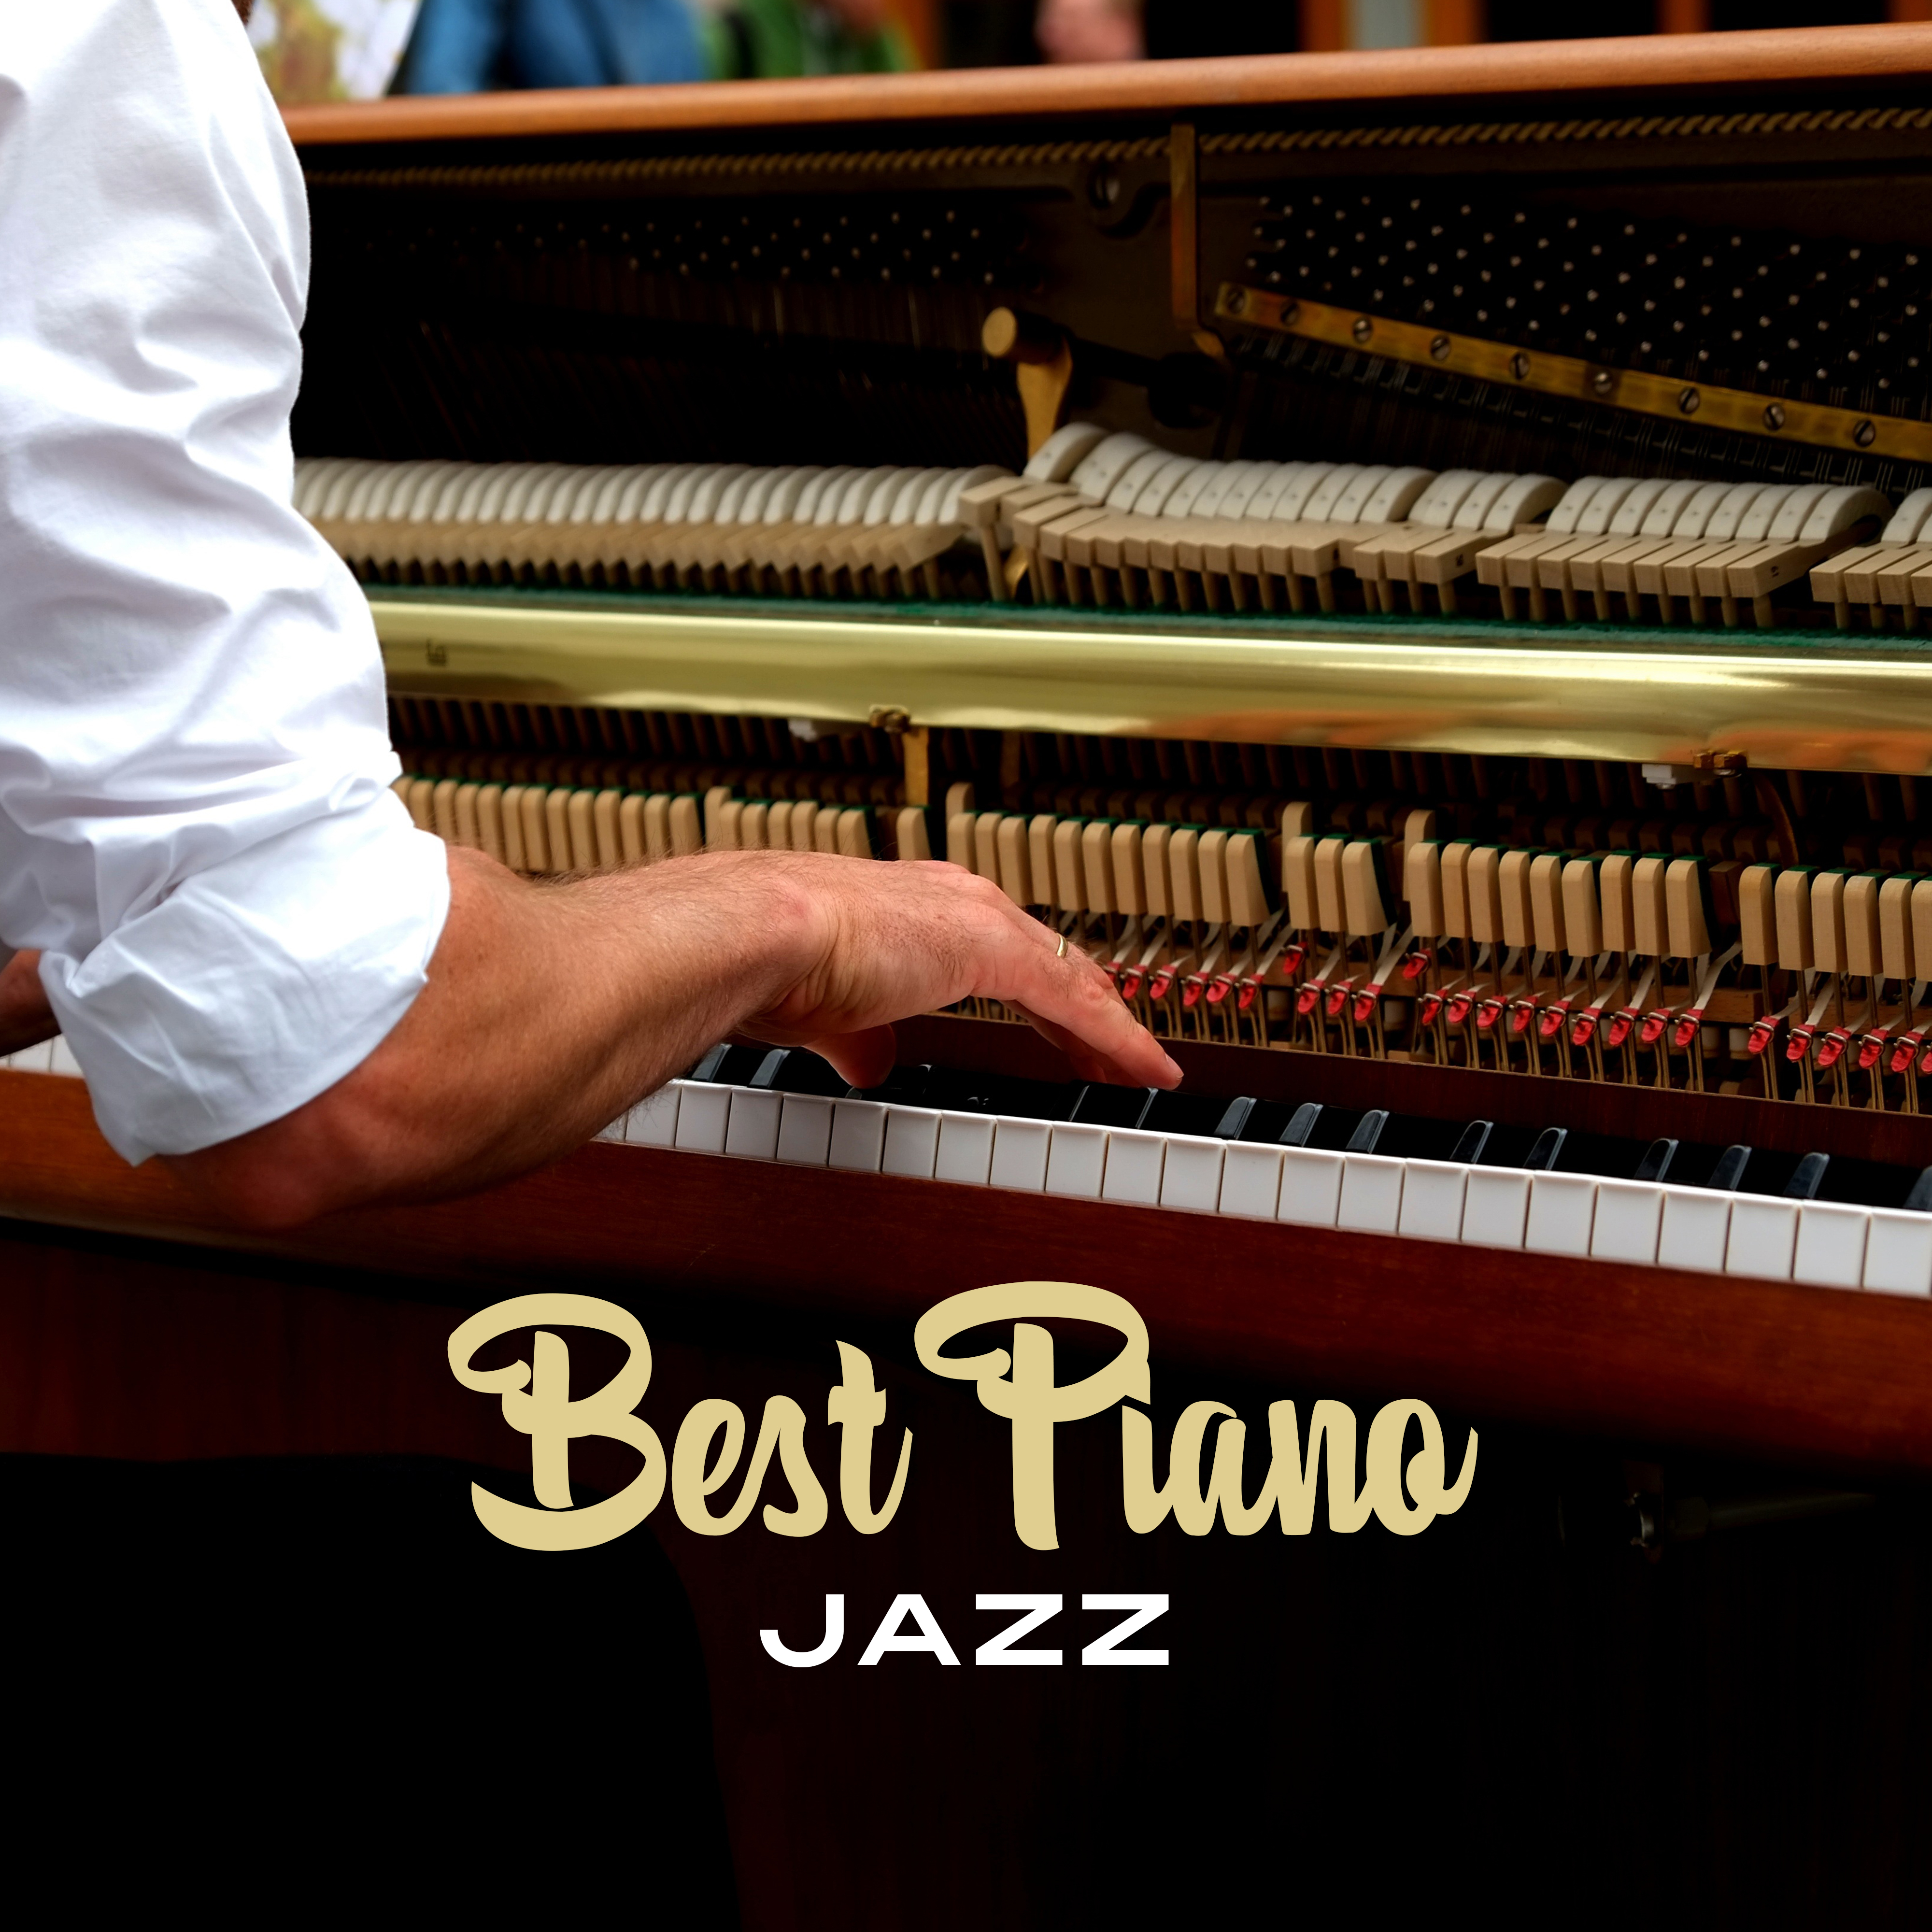 Best Piano Jazz – Sad Piano Songs, Melancholy Jazz, Calming Music to Relax, Peaceful Piano Music